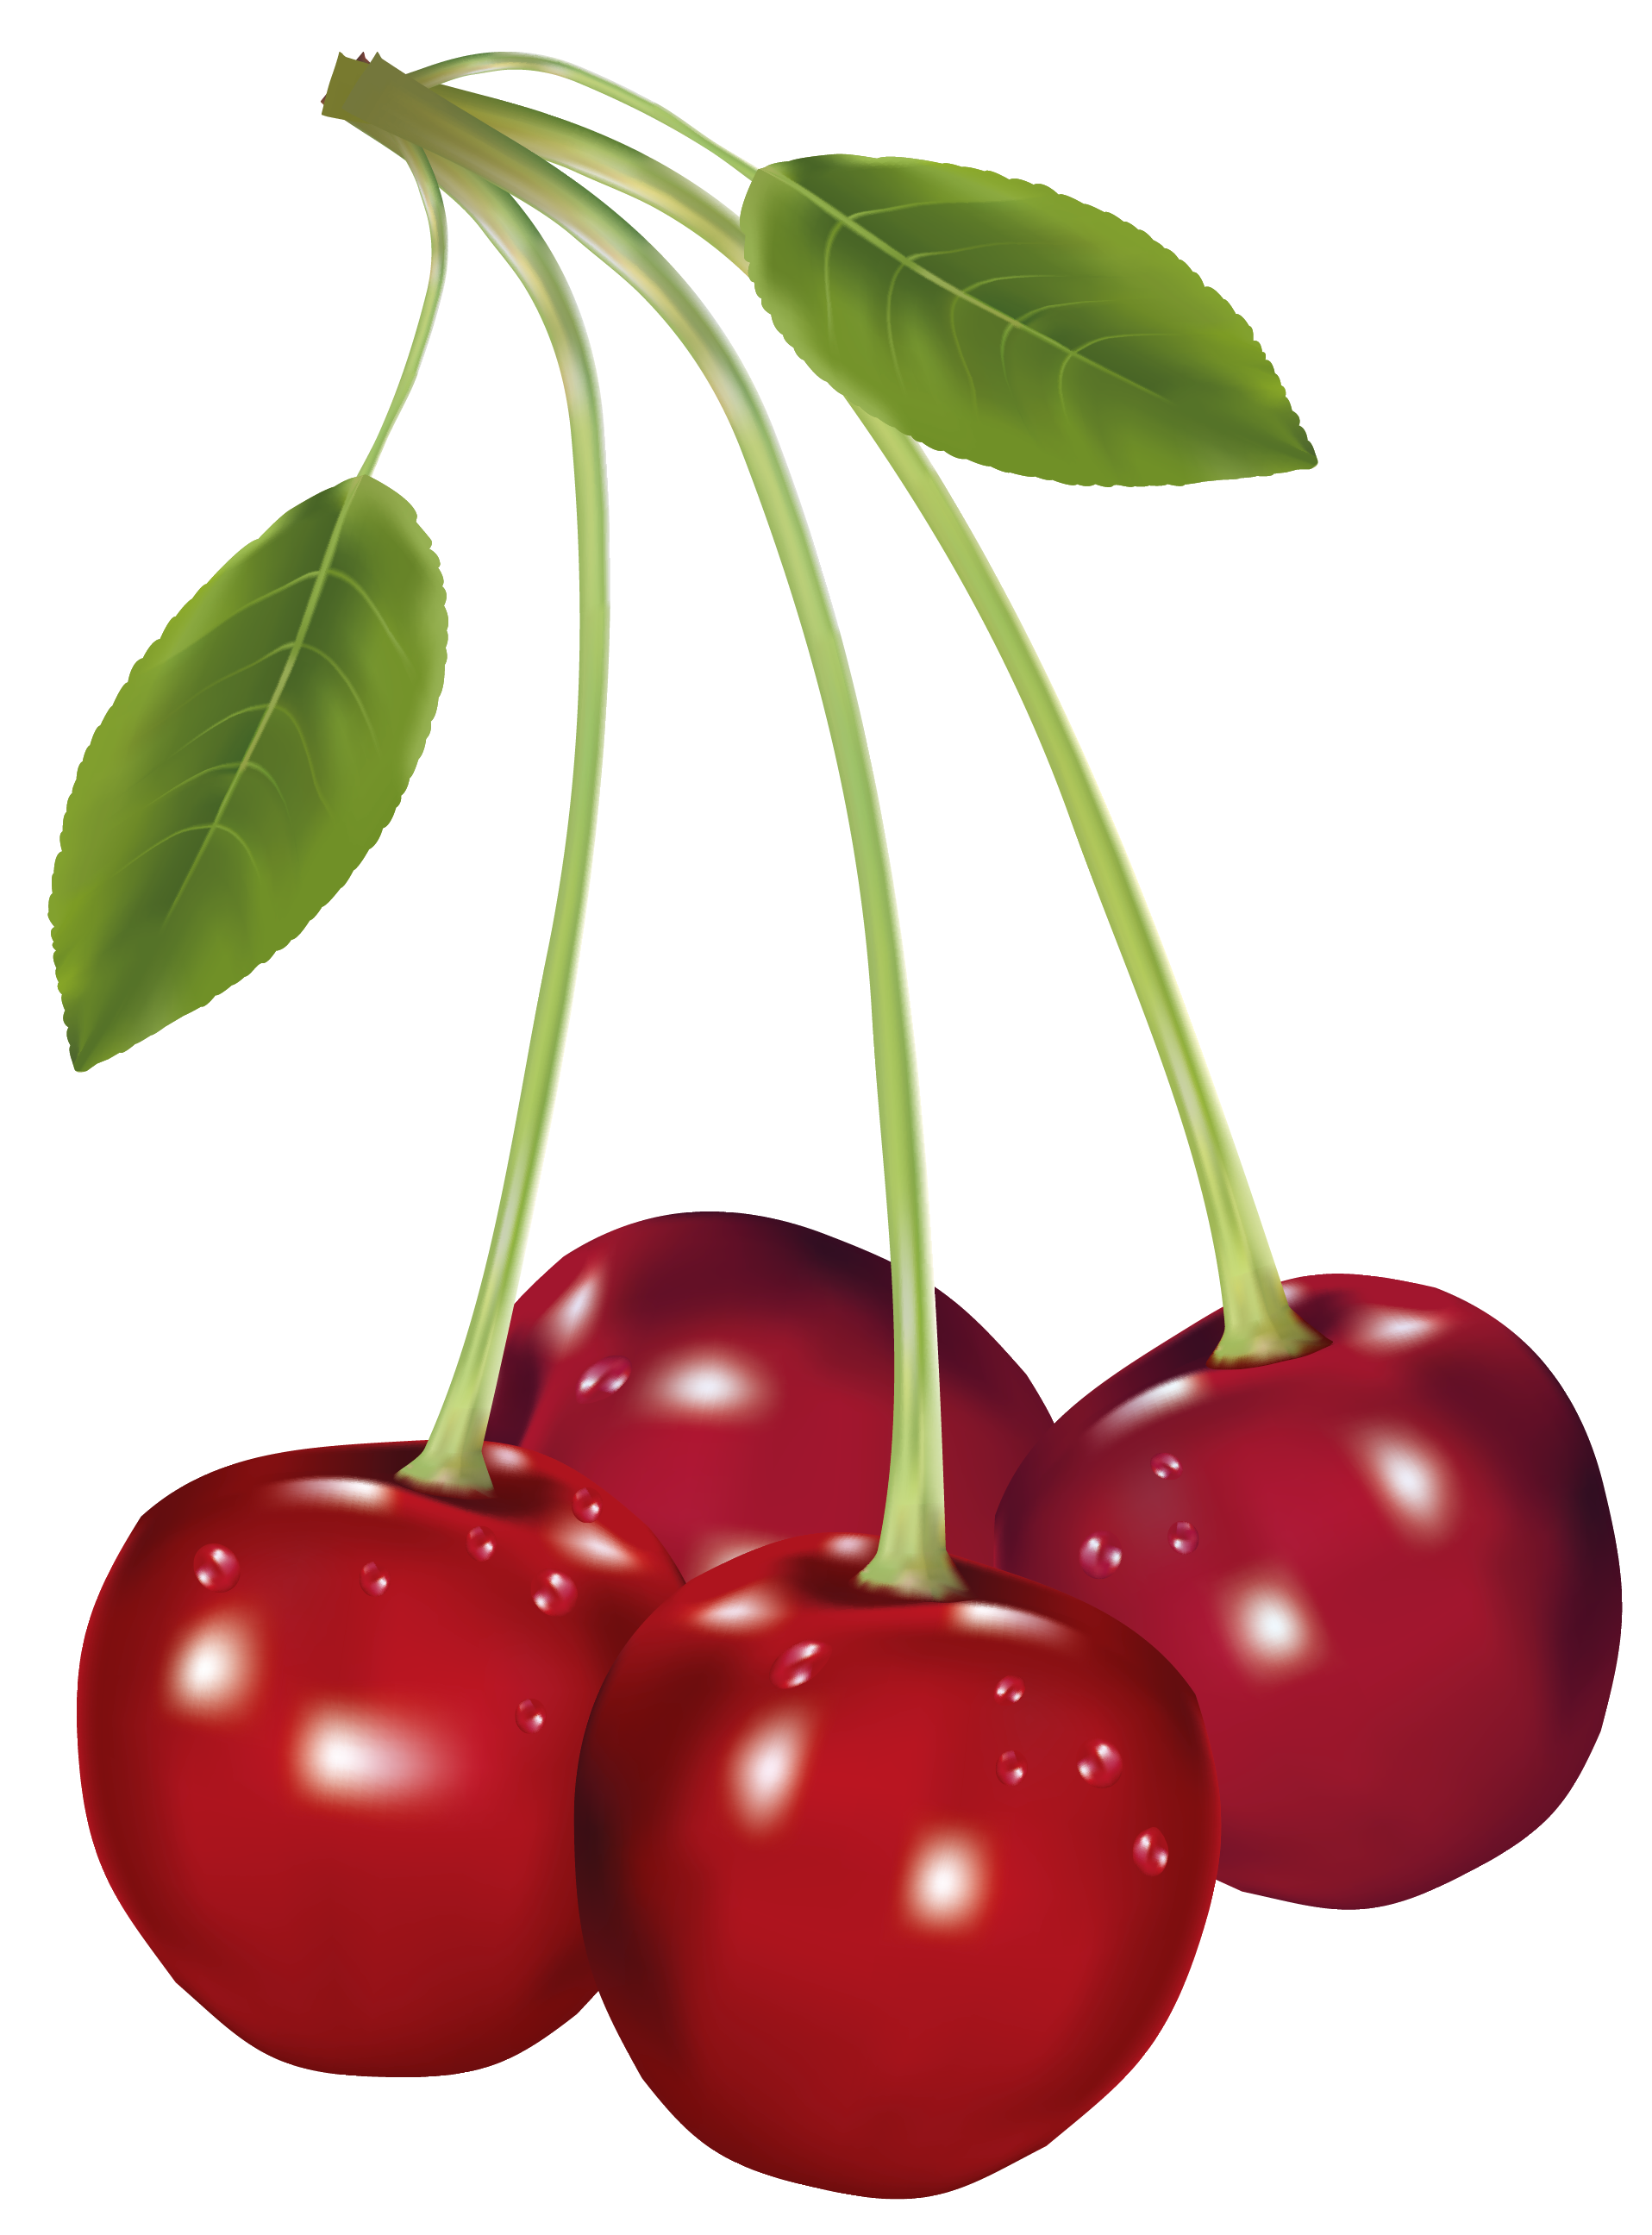 Png picture gallery yopriceville. Cherries clipart cherry fruit